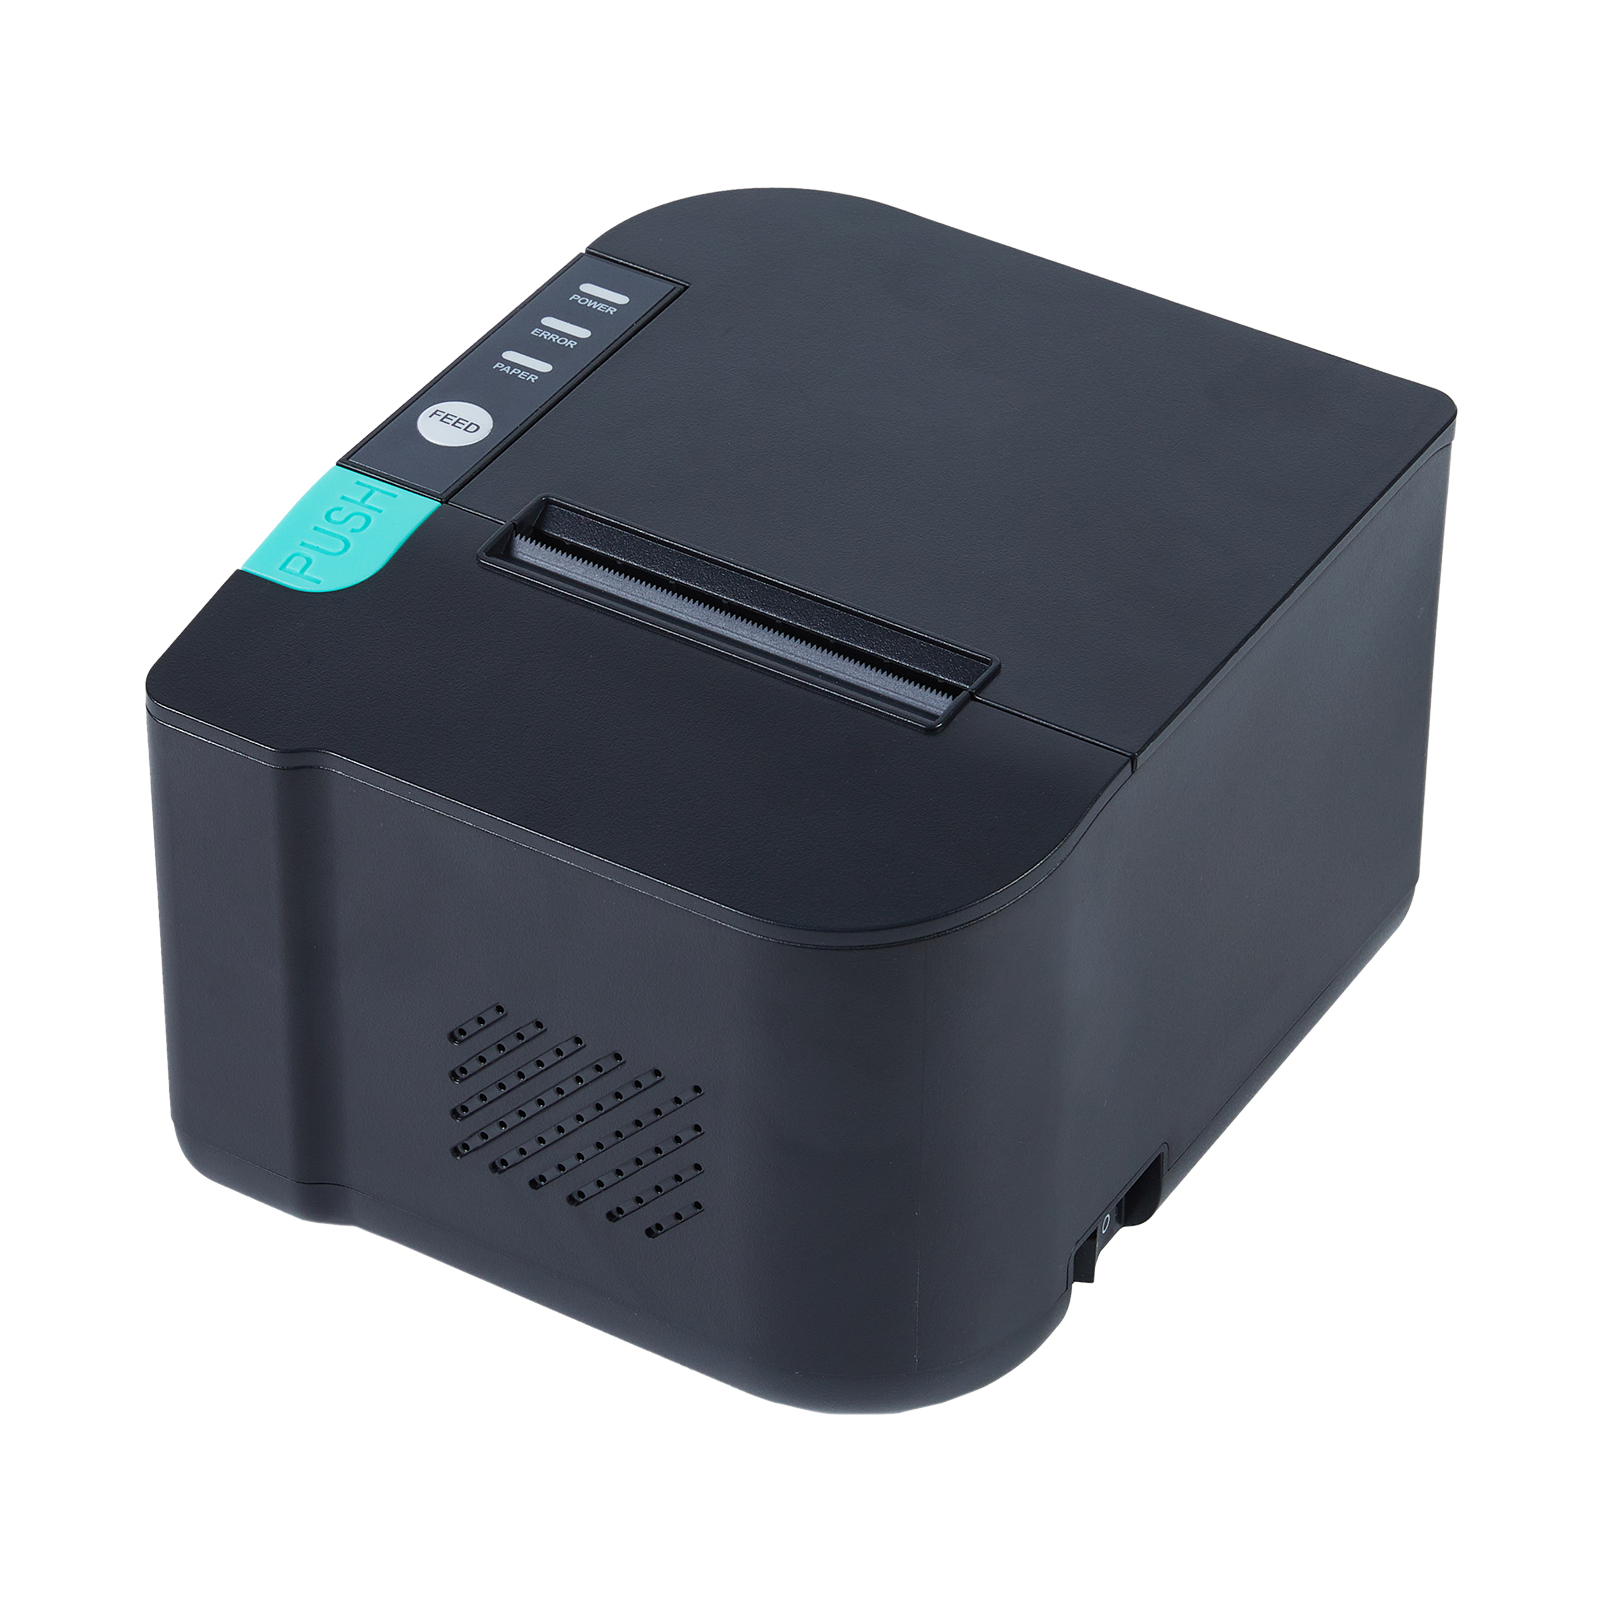 New arrival 80mm POS printer SP-R301 in Black